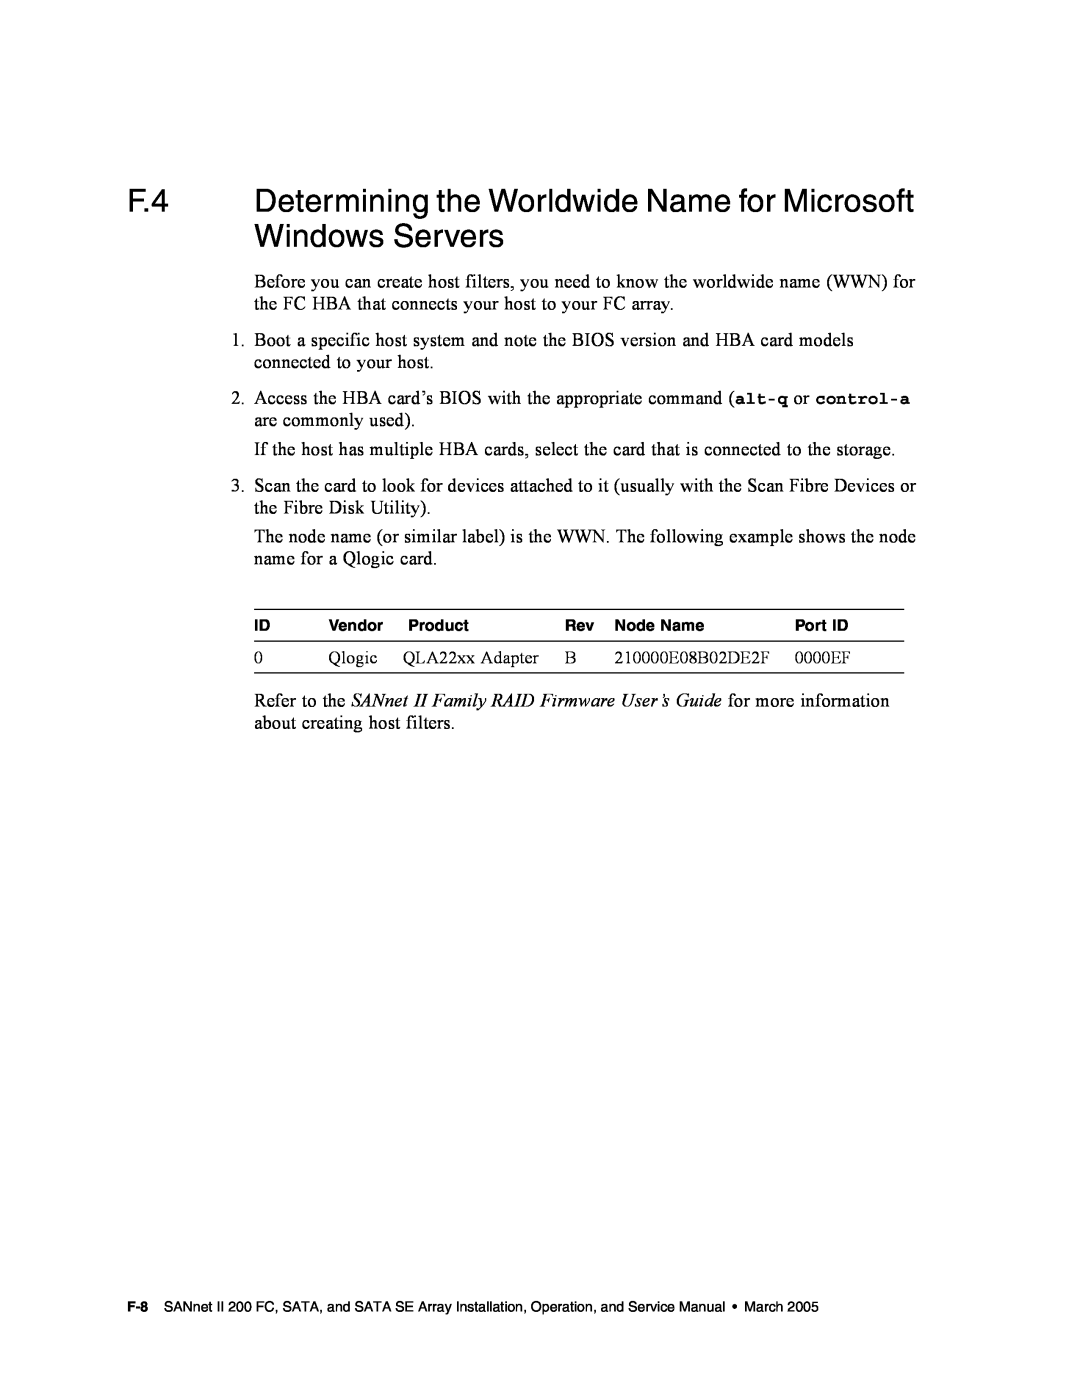 Dot Hill Systems II 200 FC service manual F.4 Determining the Worldwide Name for Microsoft Windows Servers 